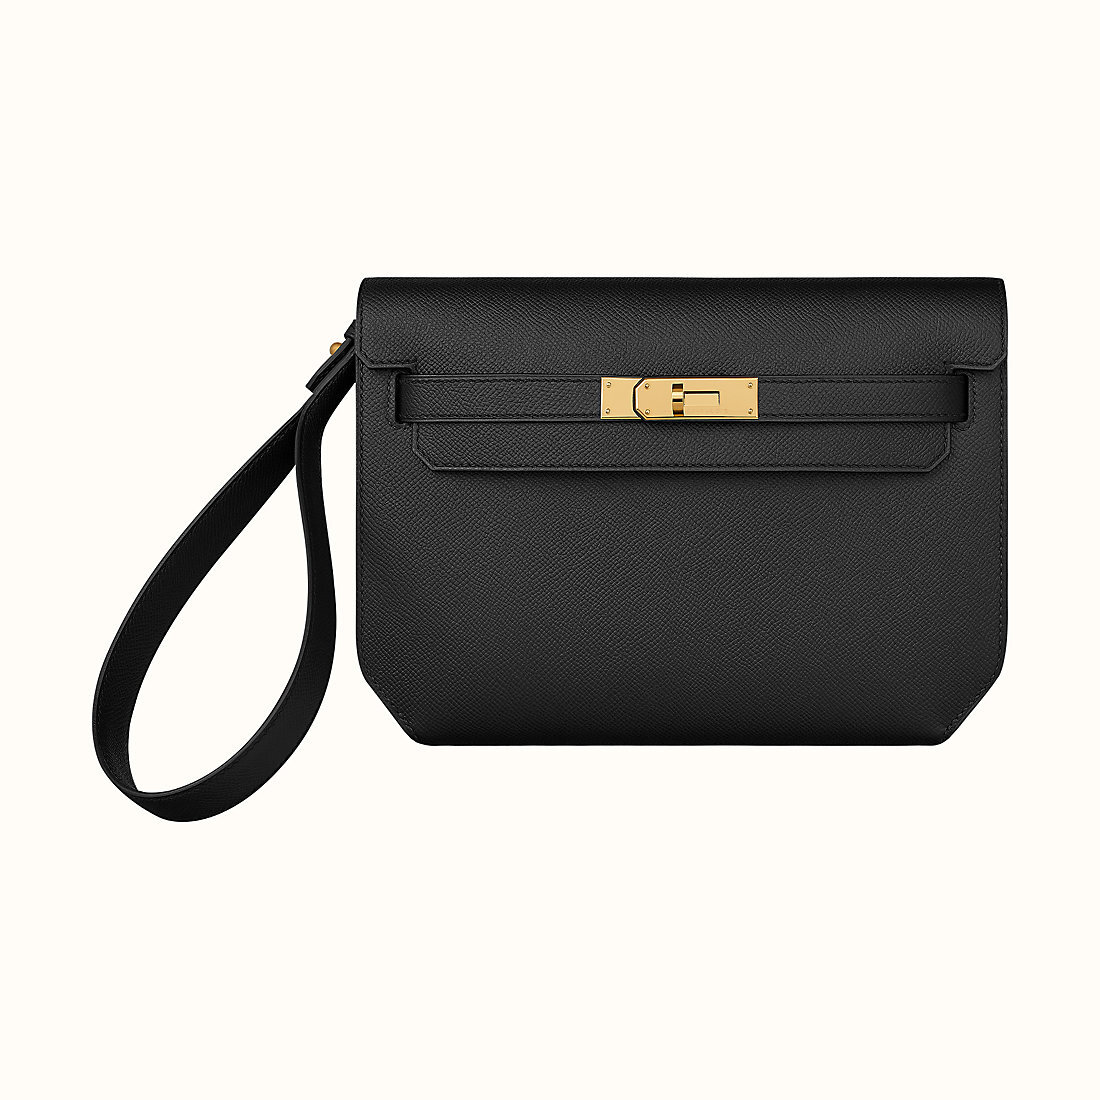 NEW Hermes Kelly Depeches Clutch Bag 